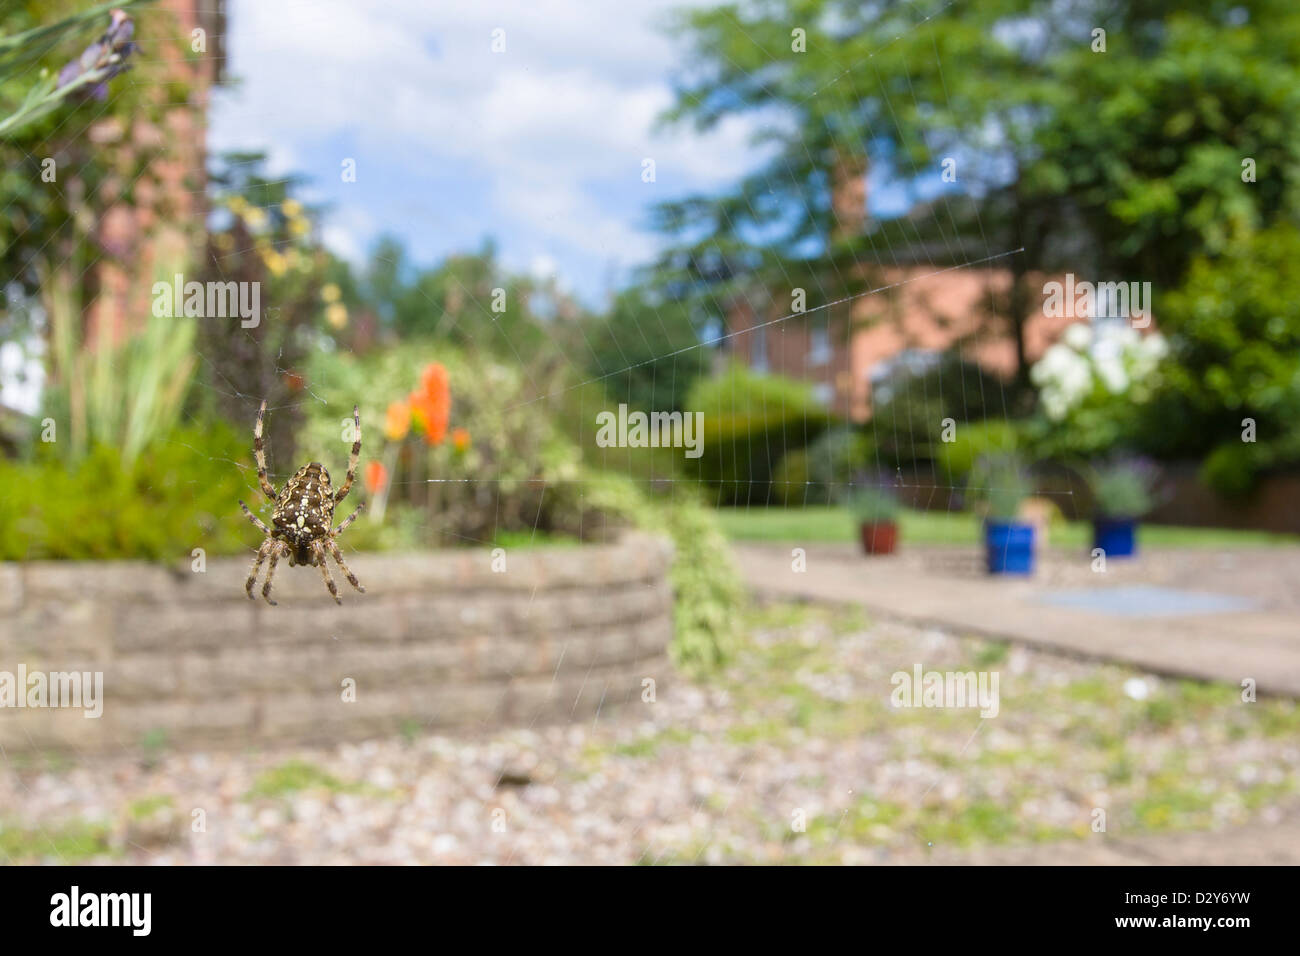 Wide angle view of European Garden Spider Araneus diadematus in web amongst garden setting with houses and plant pots background Stock Photo